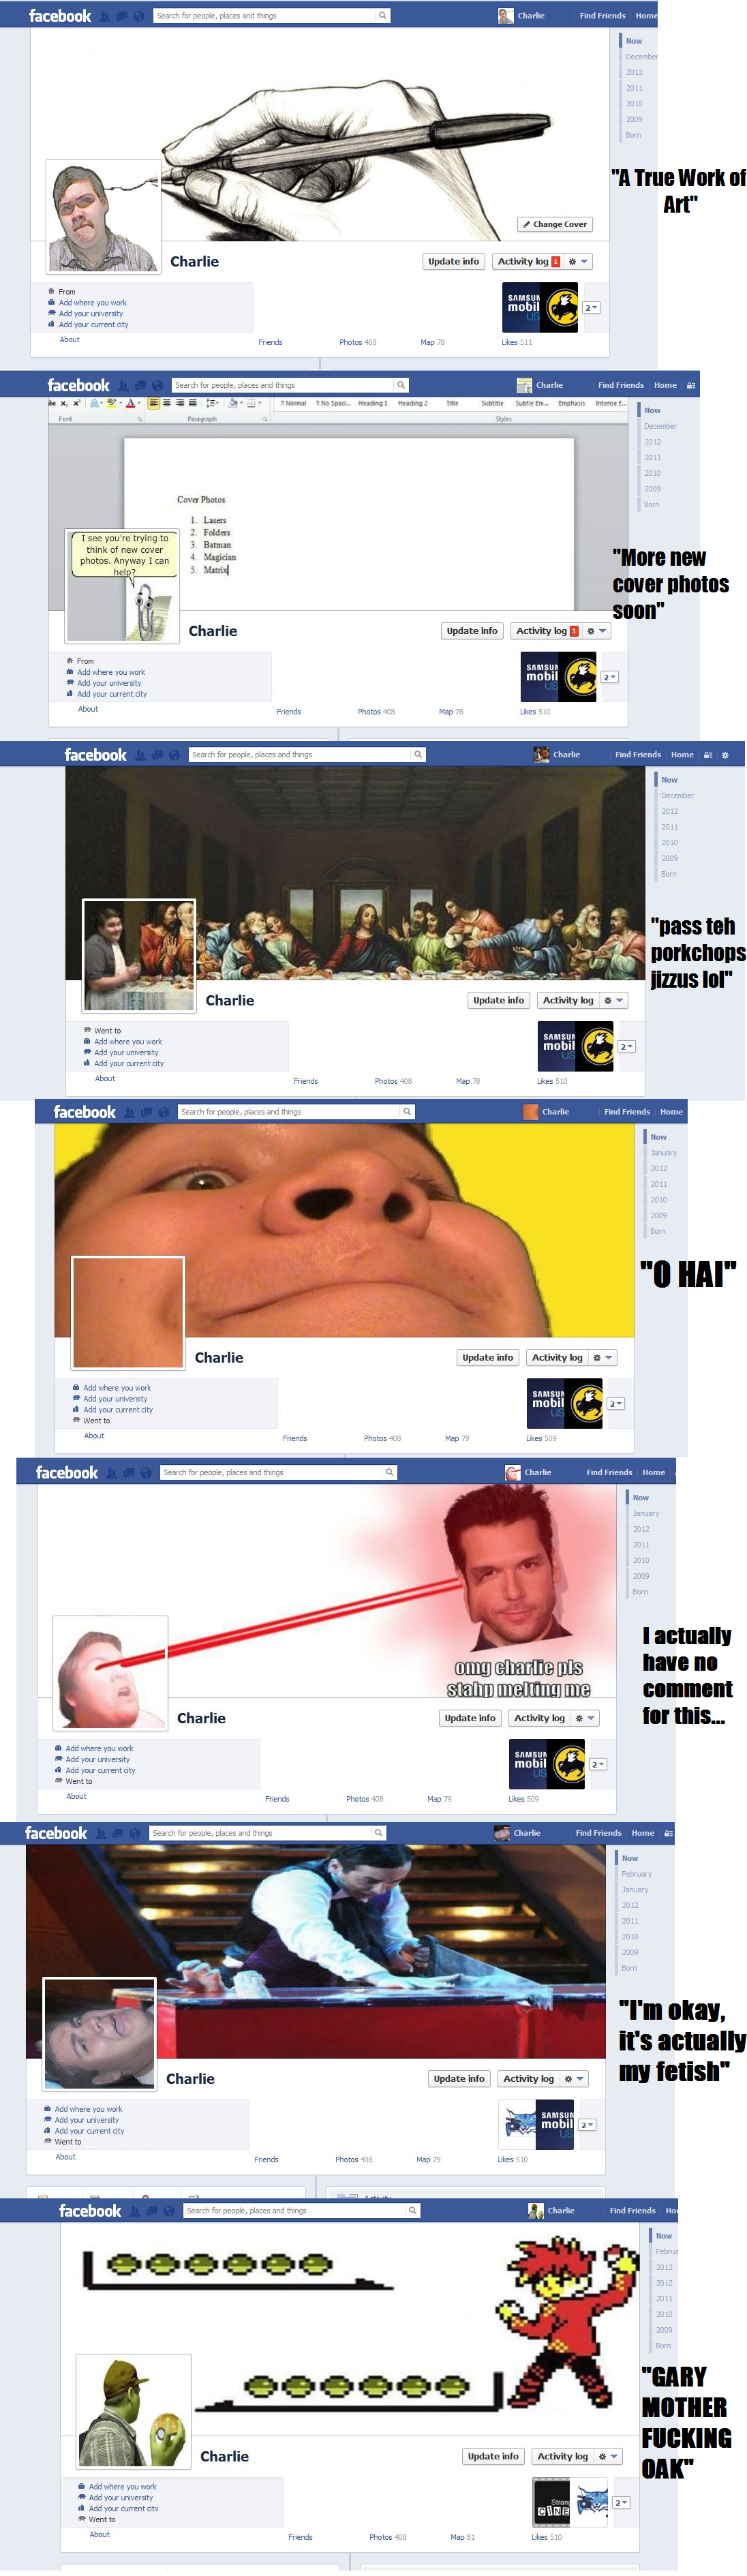 My Facebook Cover Photos 3. 85% OC, because the last one I did not come up with, the cover photo was given by some user on here. But yeah, that's me. I change t